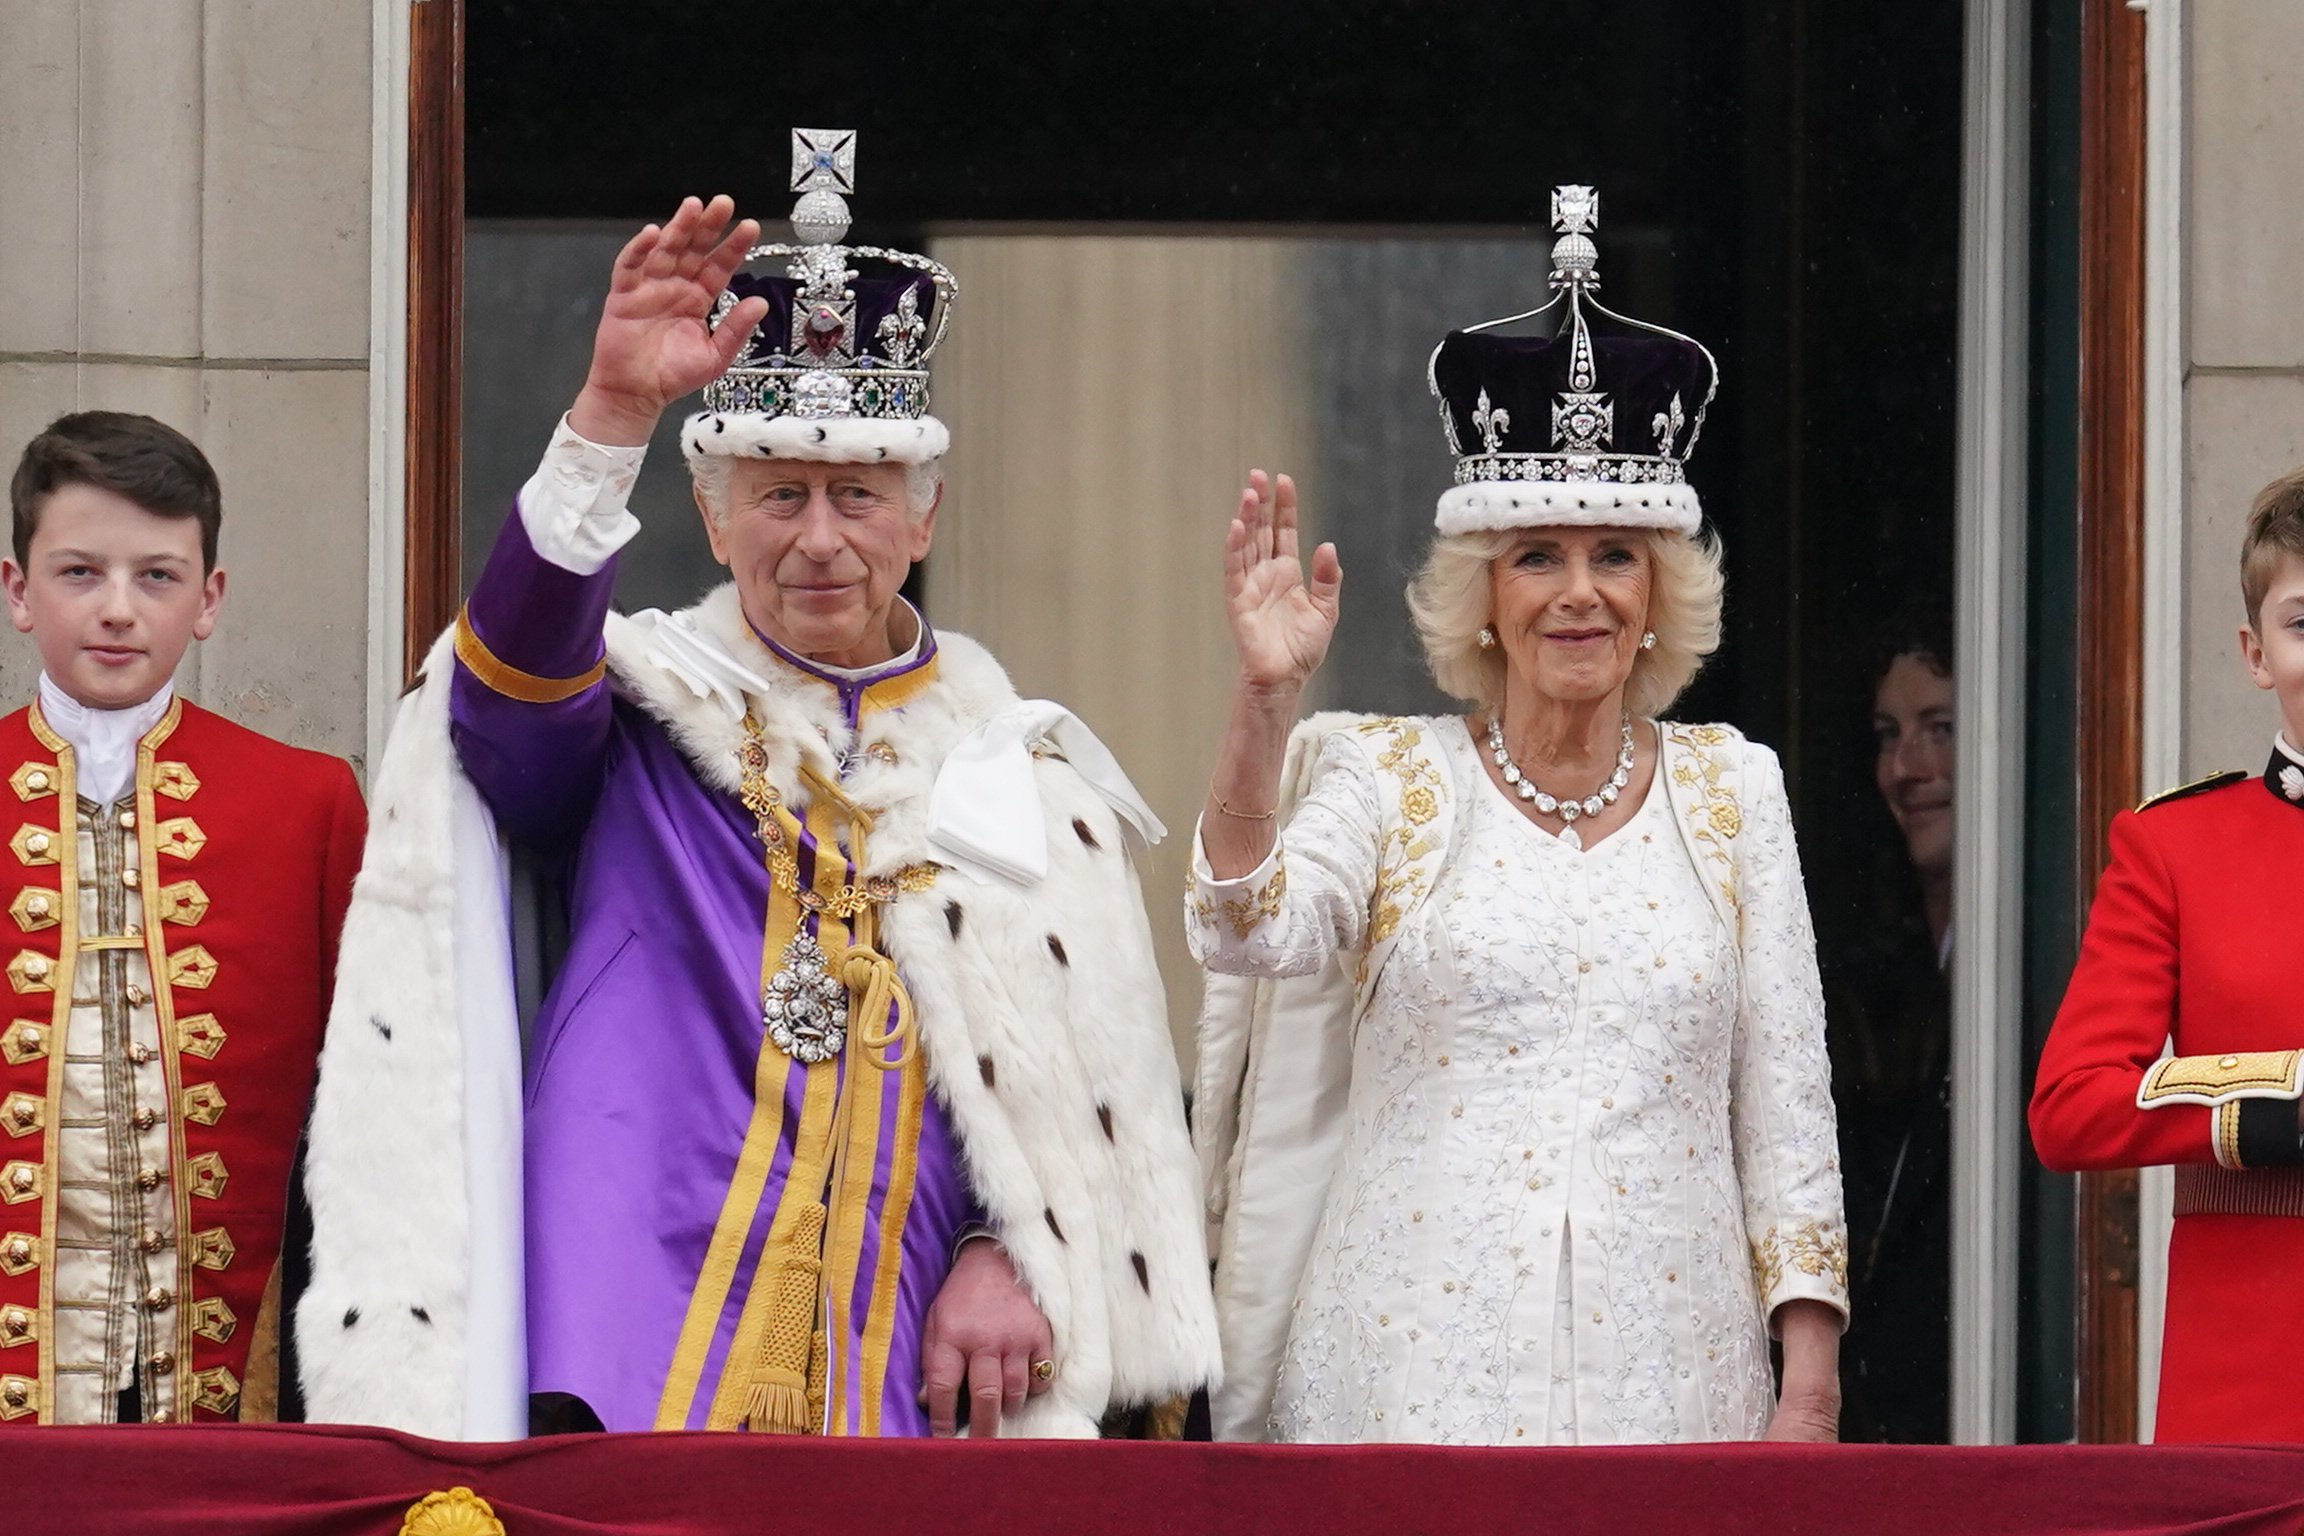 King Charles on the balcony of Buckingham Palace with his wife Queen Camilla. Photo: dpa